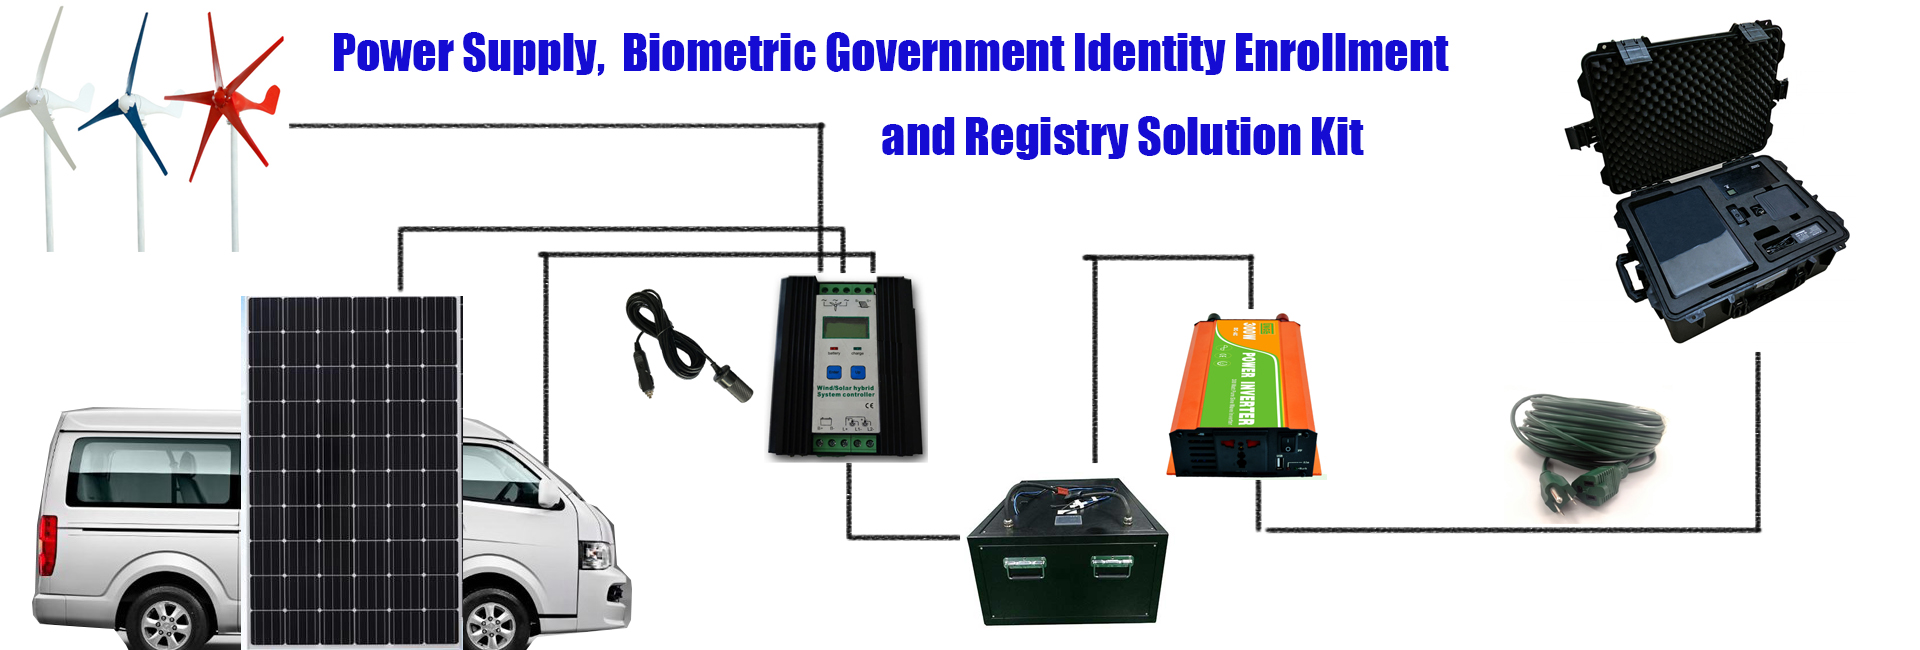 Electrical power, Biometric Government Identity Enrollment and Registry Solution Kit